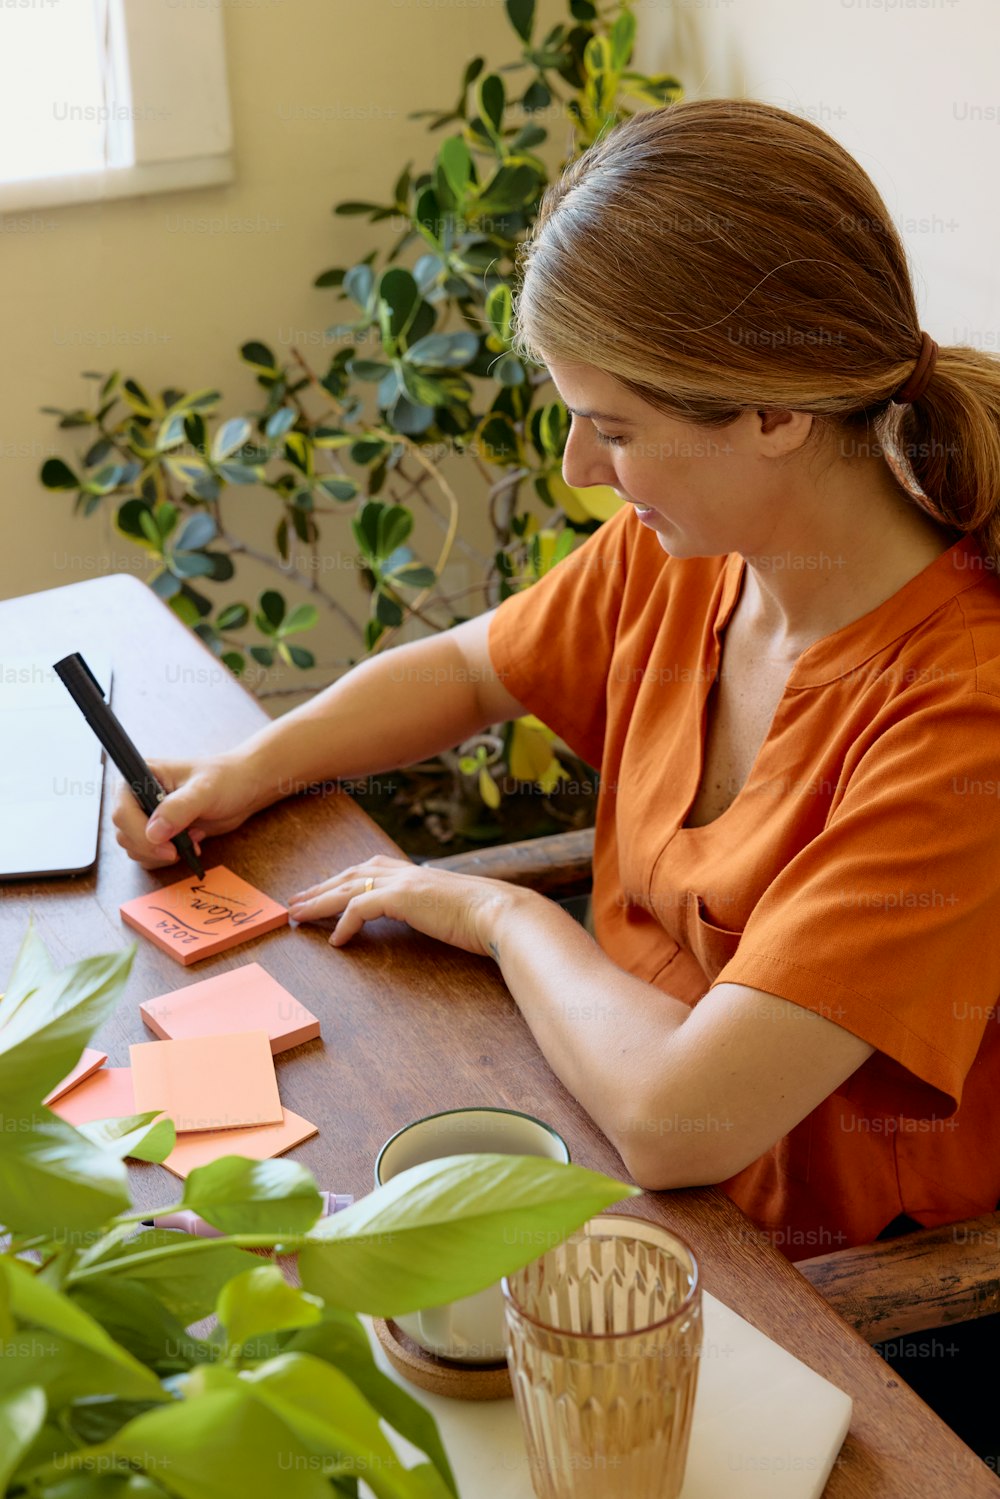 a woman sitting at a table writing on a piece of paper